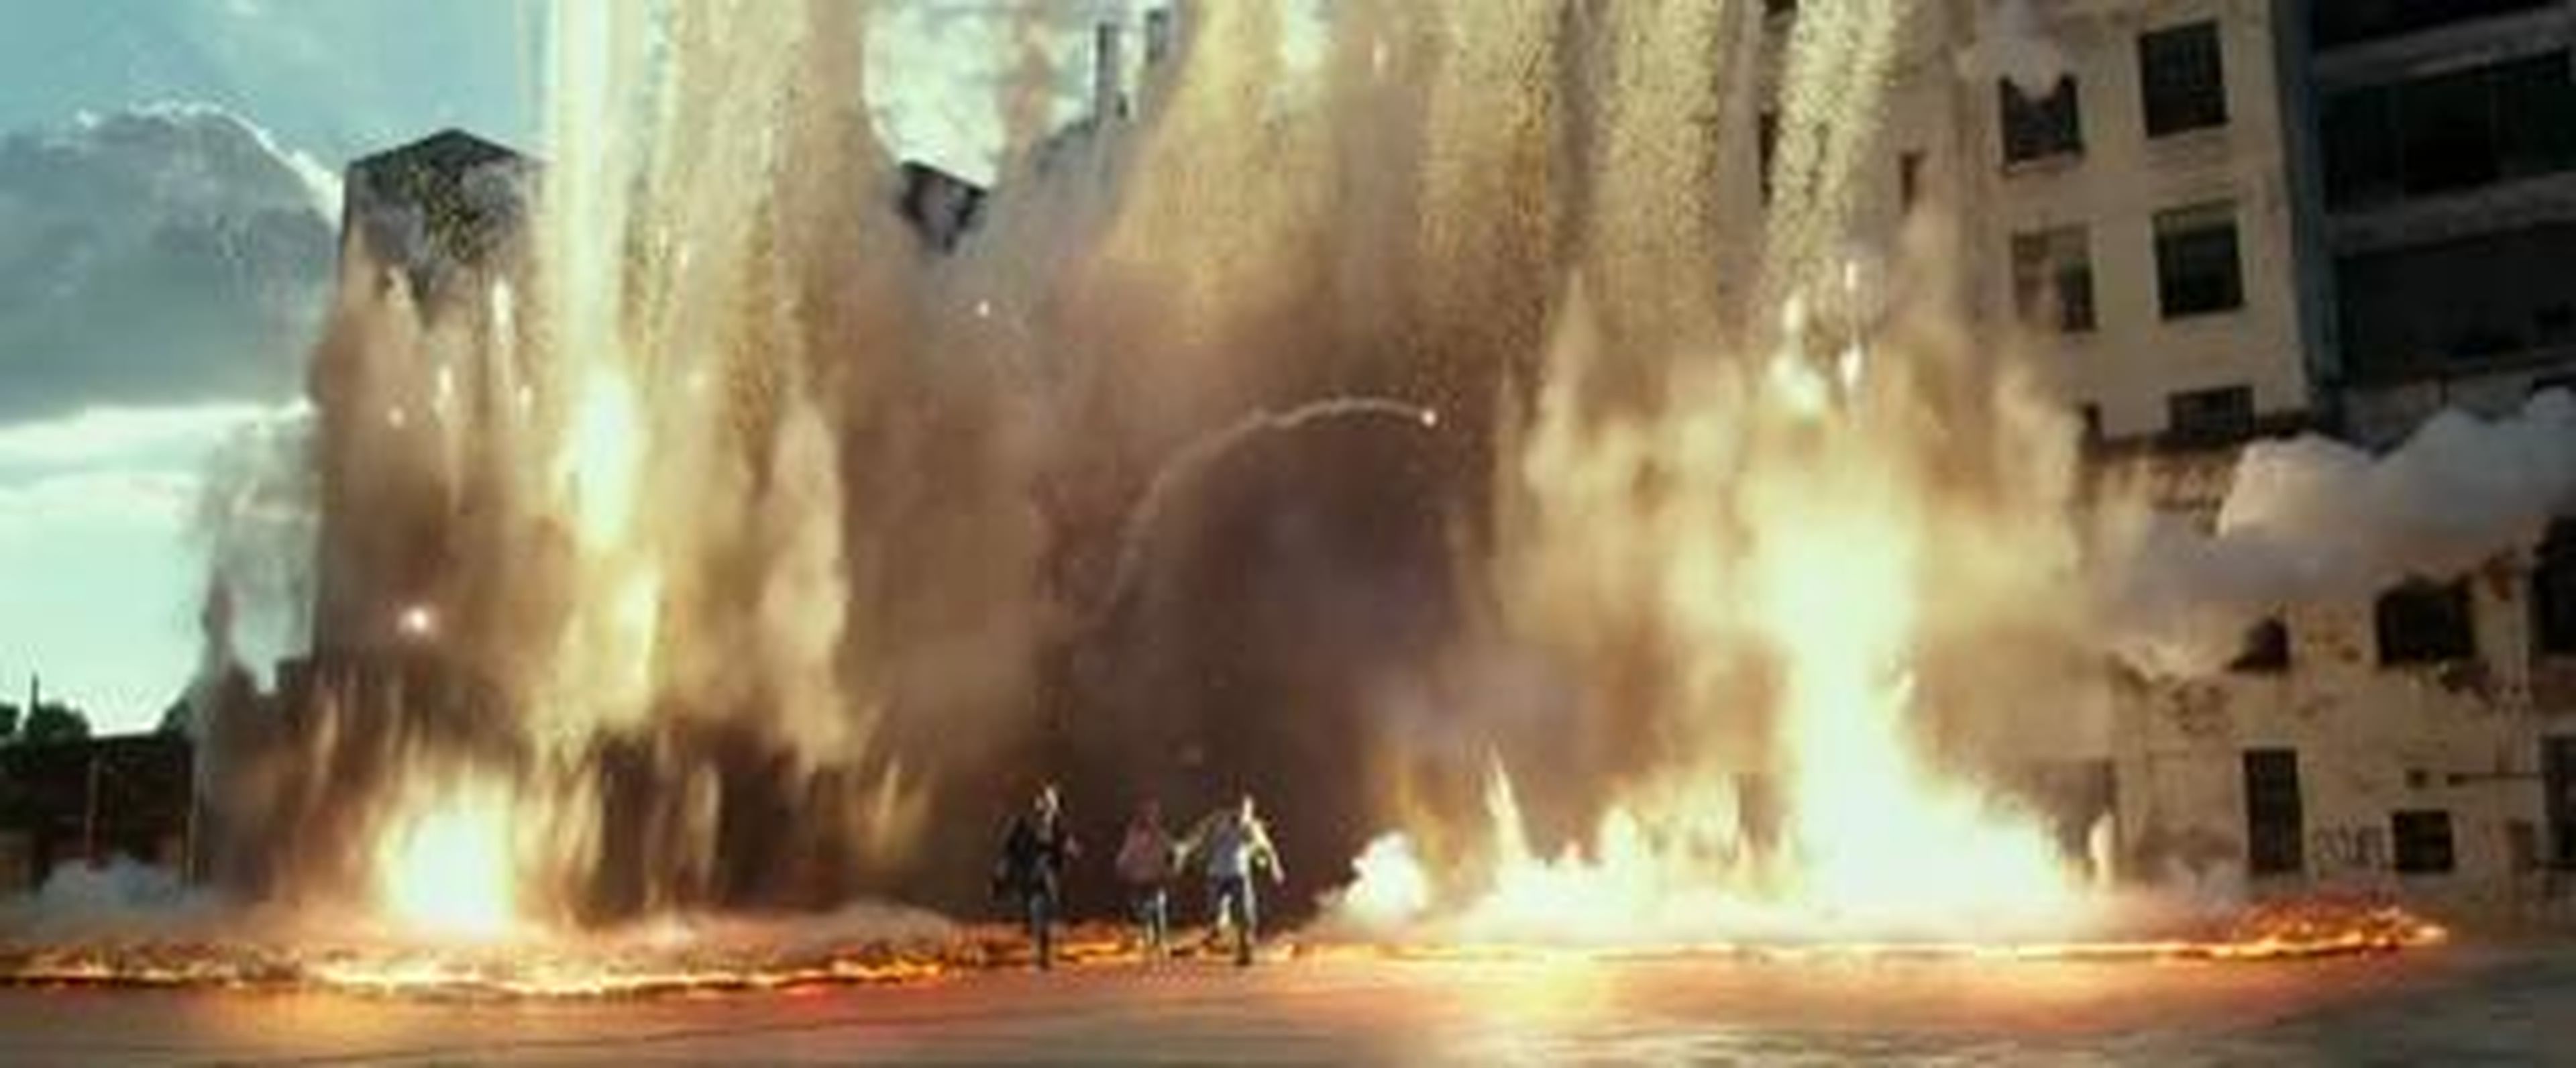 Transformers: Age of Extinction - TV Spot